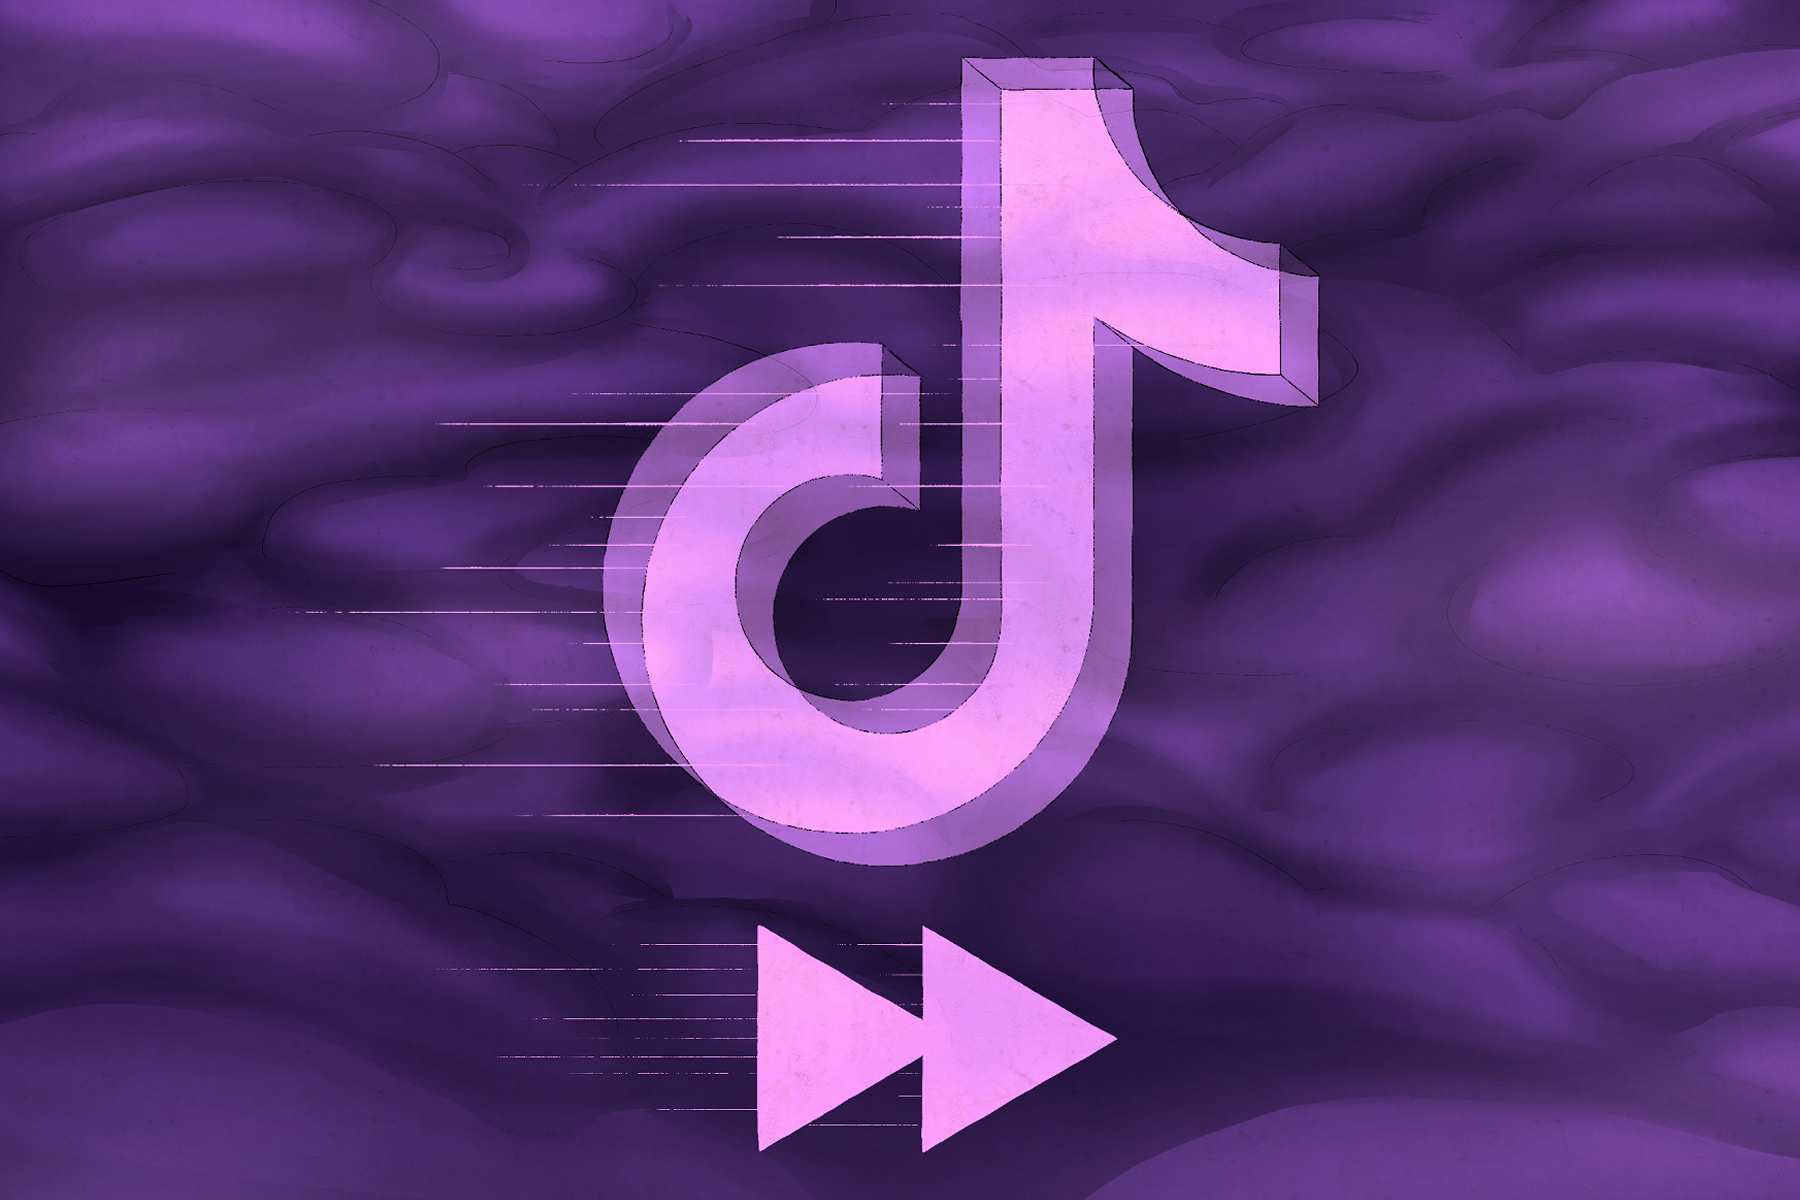 A hazy purple background showcases the Tik Tok logo as if it's being played fast forward.